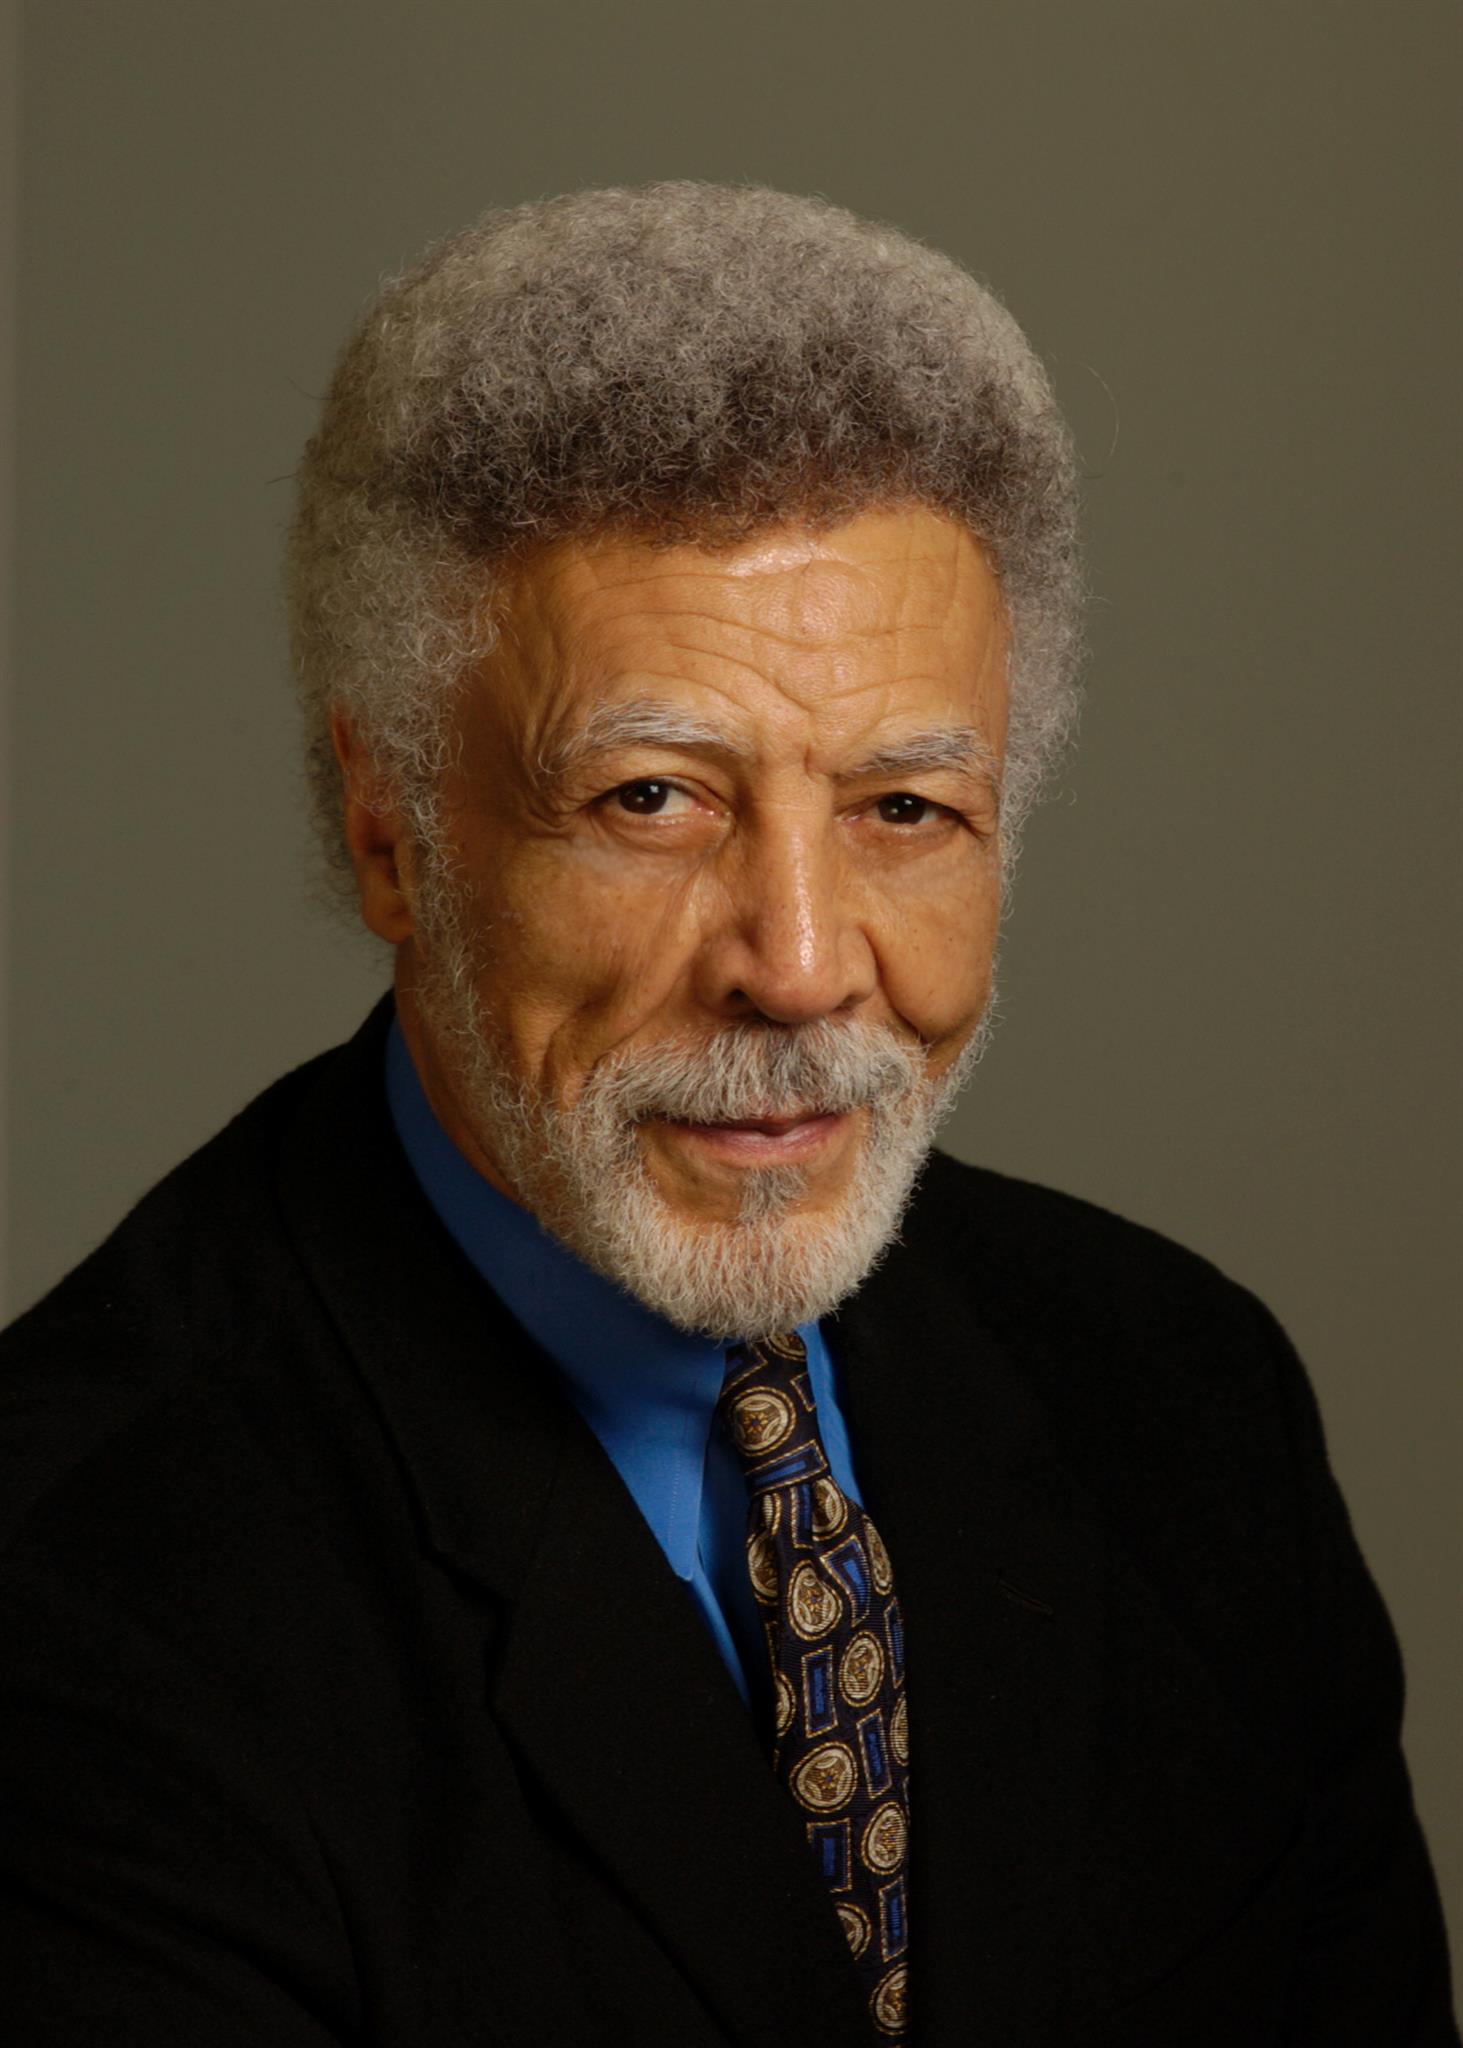 Honorable Ronald V. Dellums